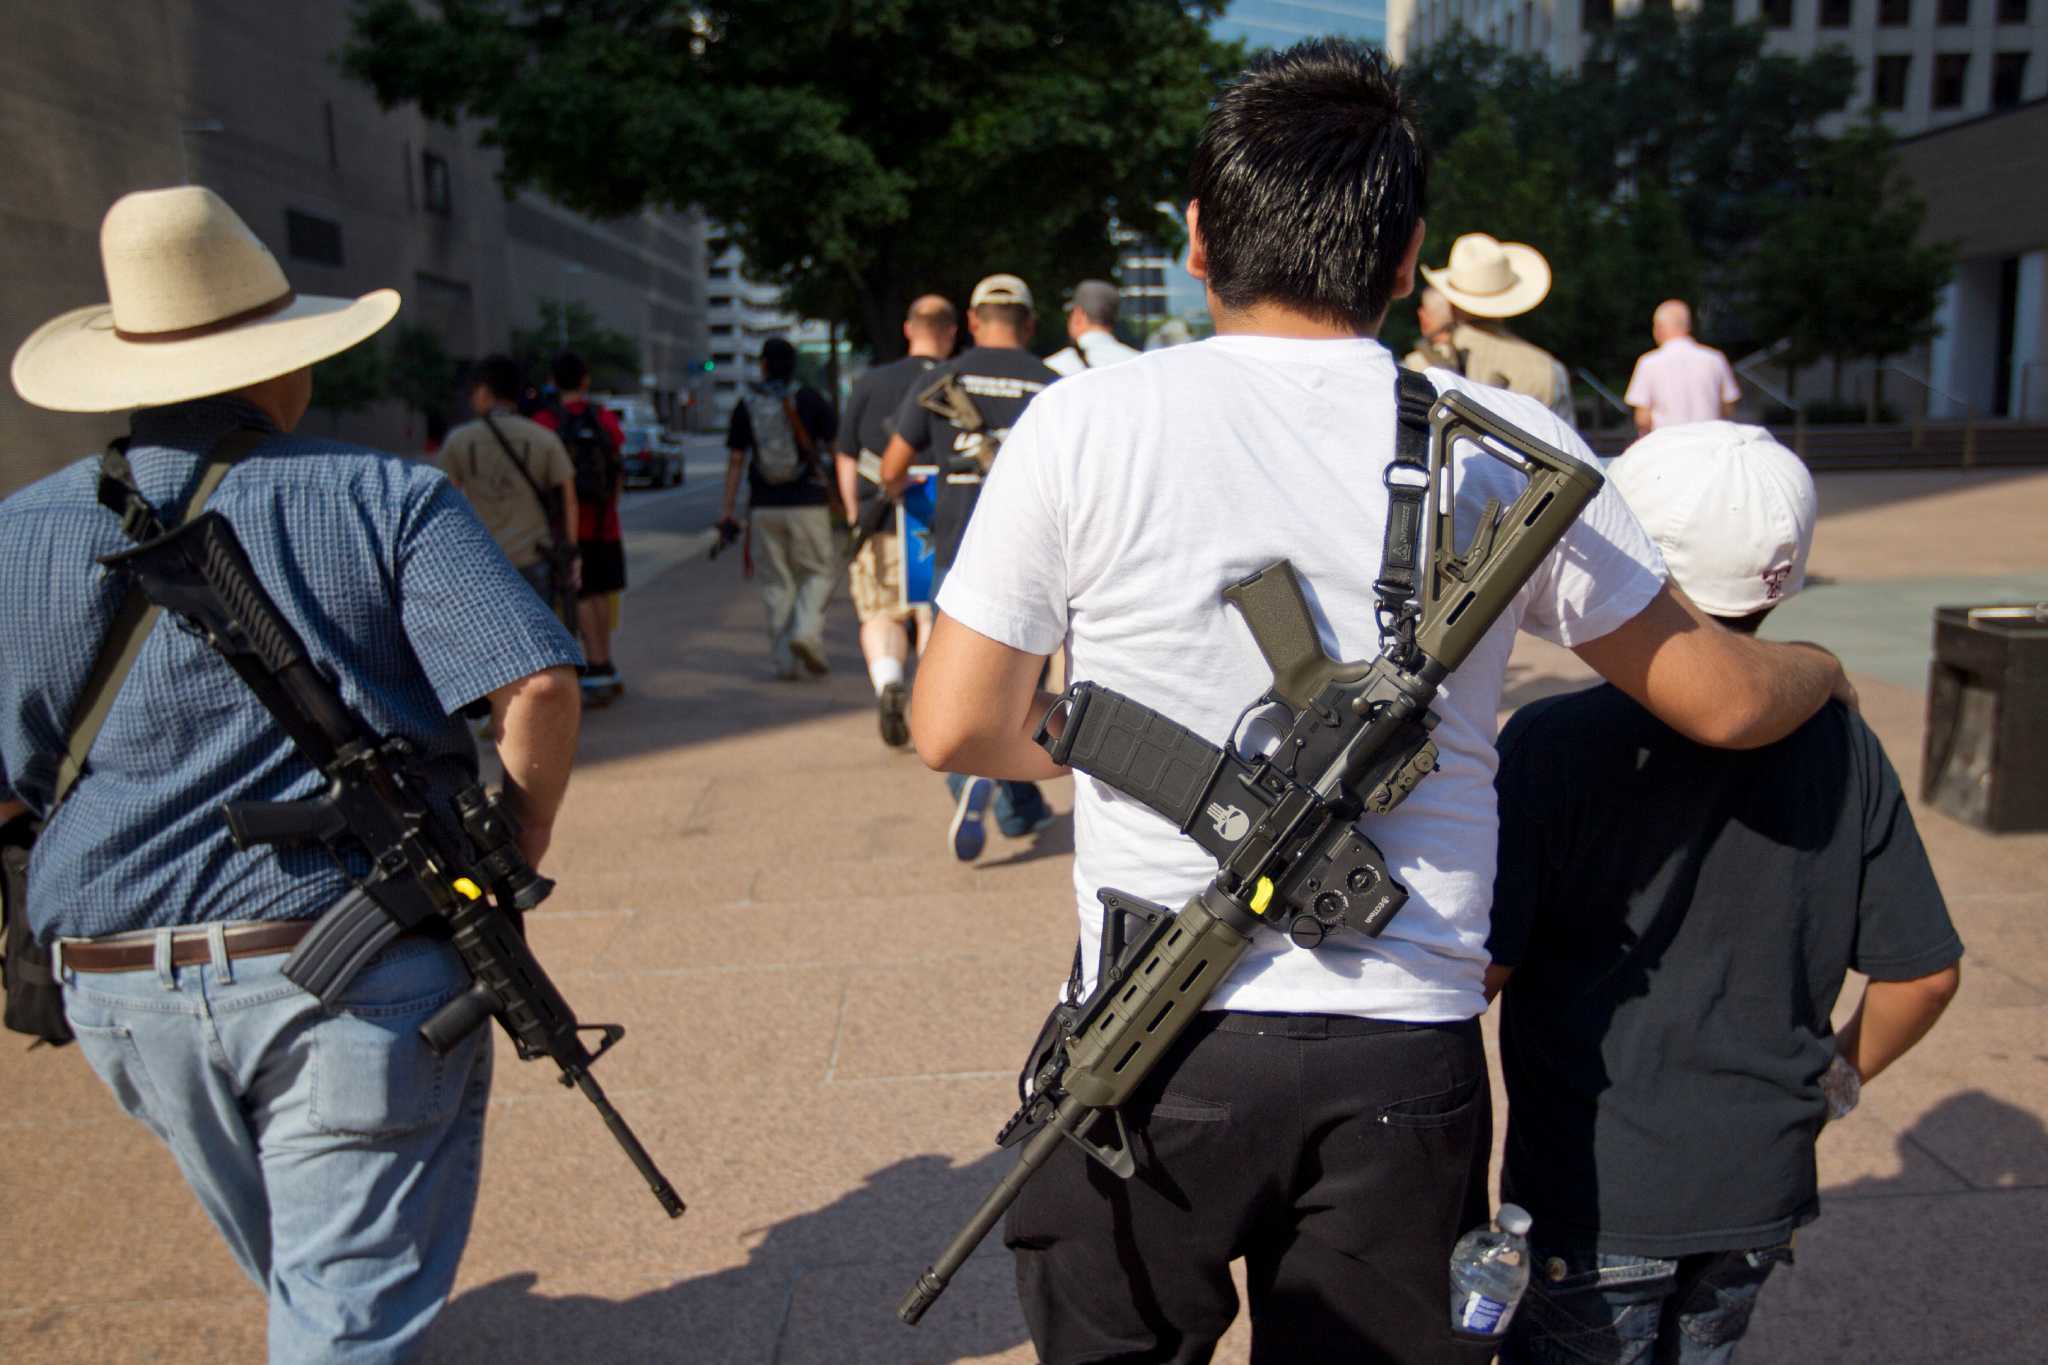 Senate approves opencarry bill